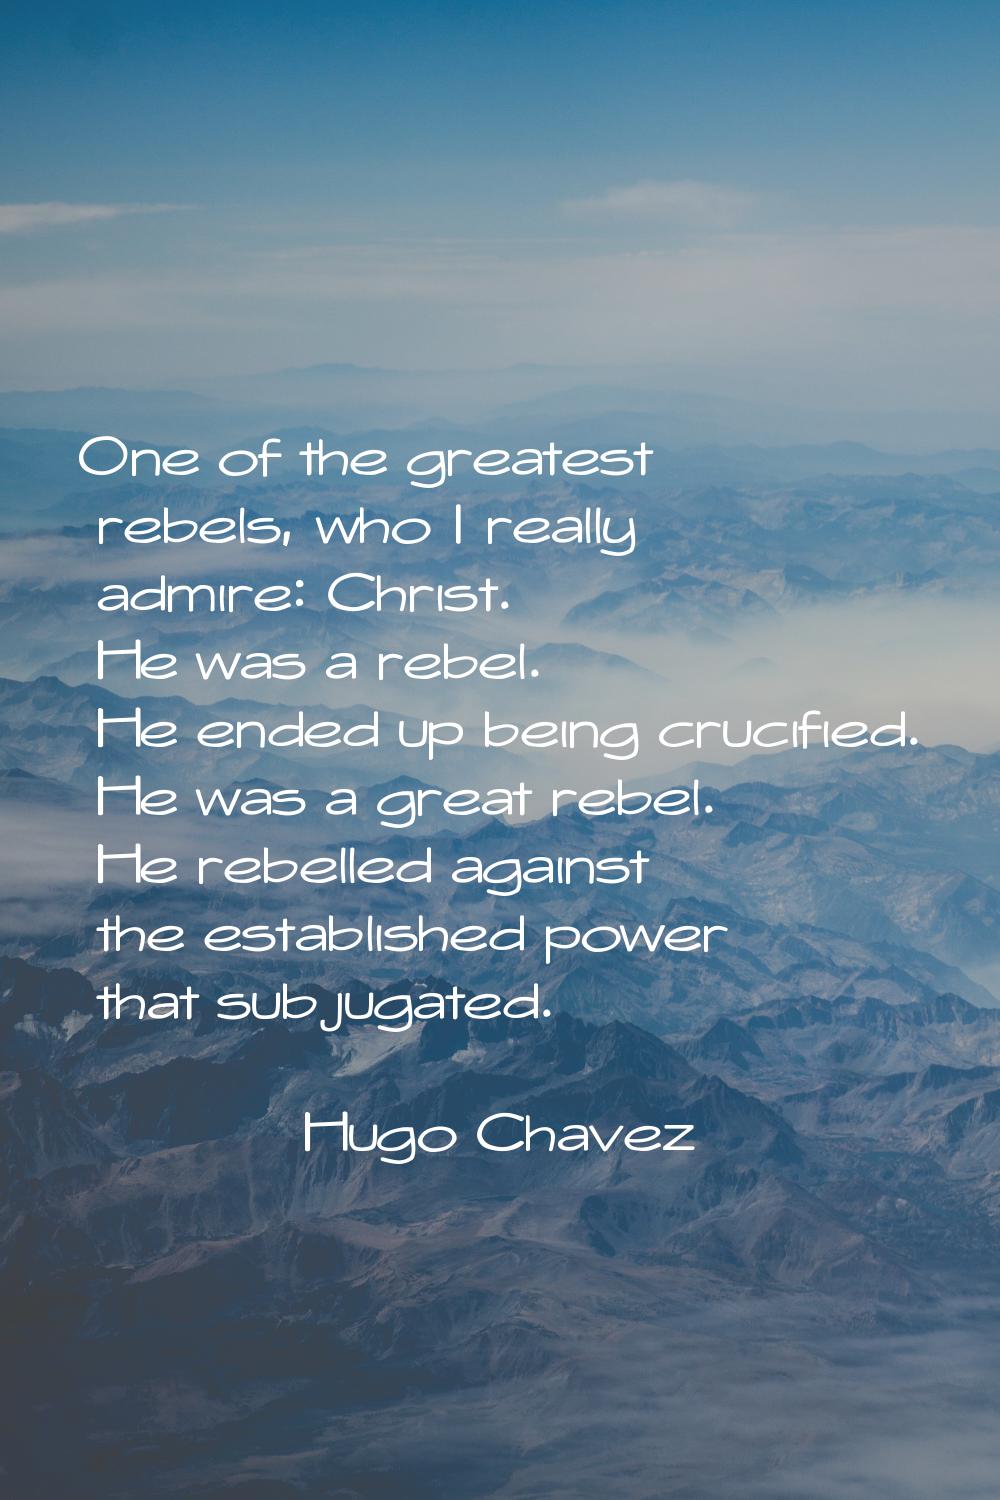 One of the greatest rebels, who I really admire: Christ. He was a rebel. He ended up being crucifie